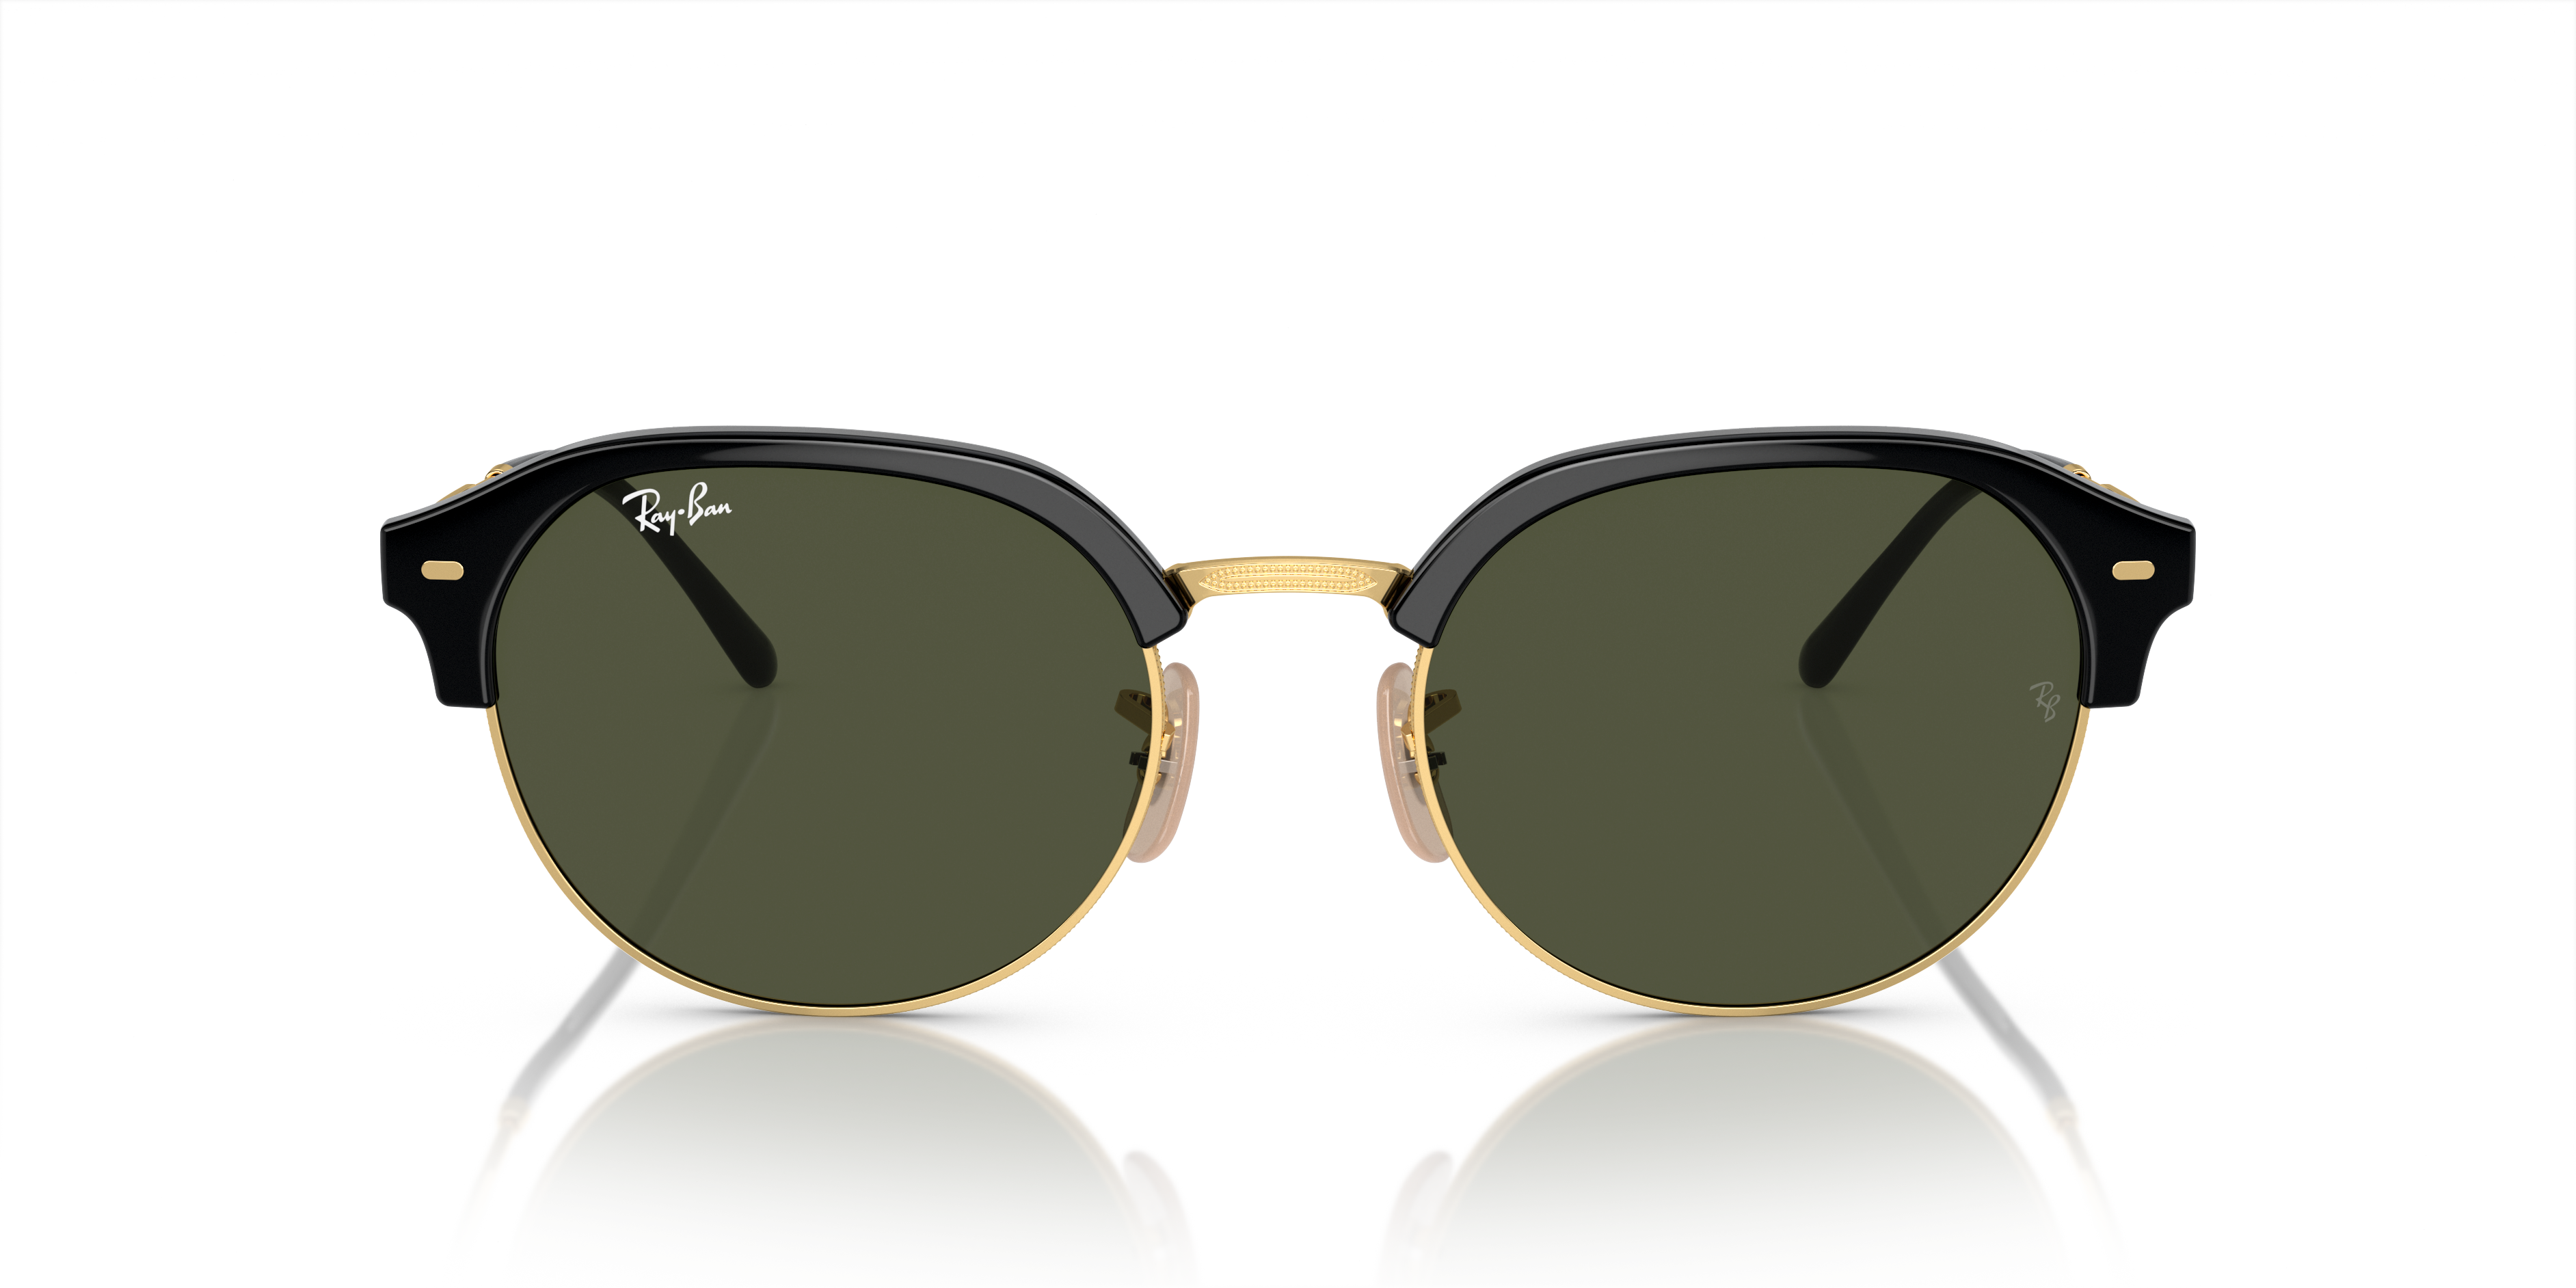 [products.image.front] Ray-Ban RB4429 601/31